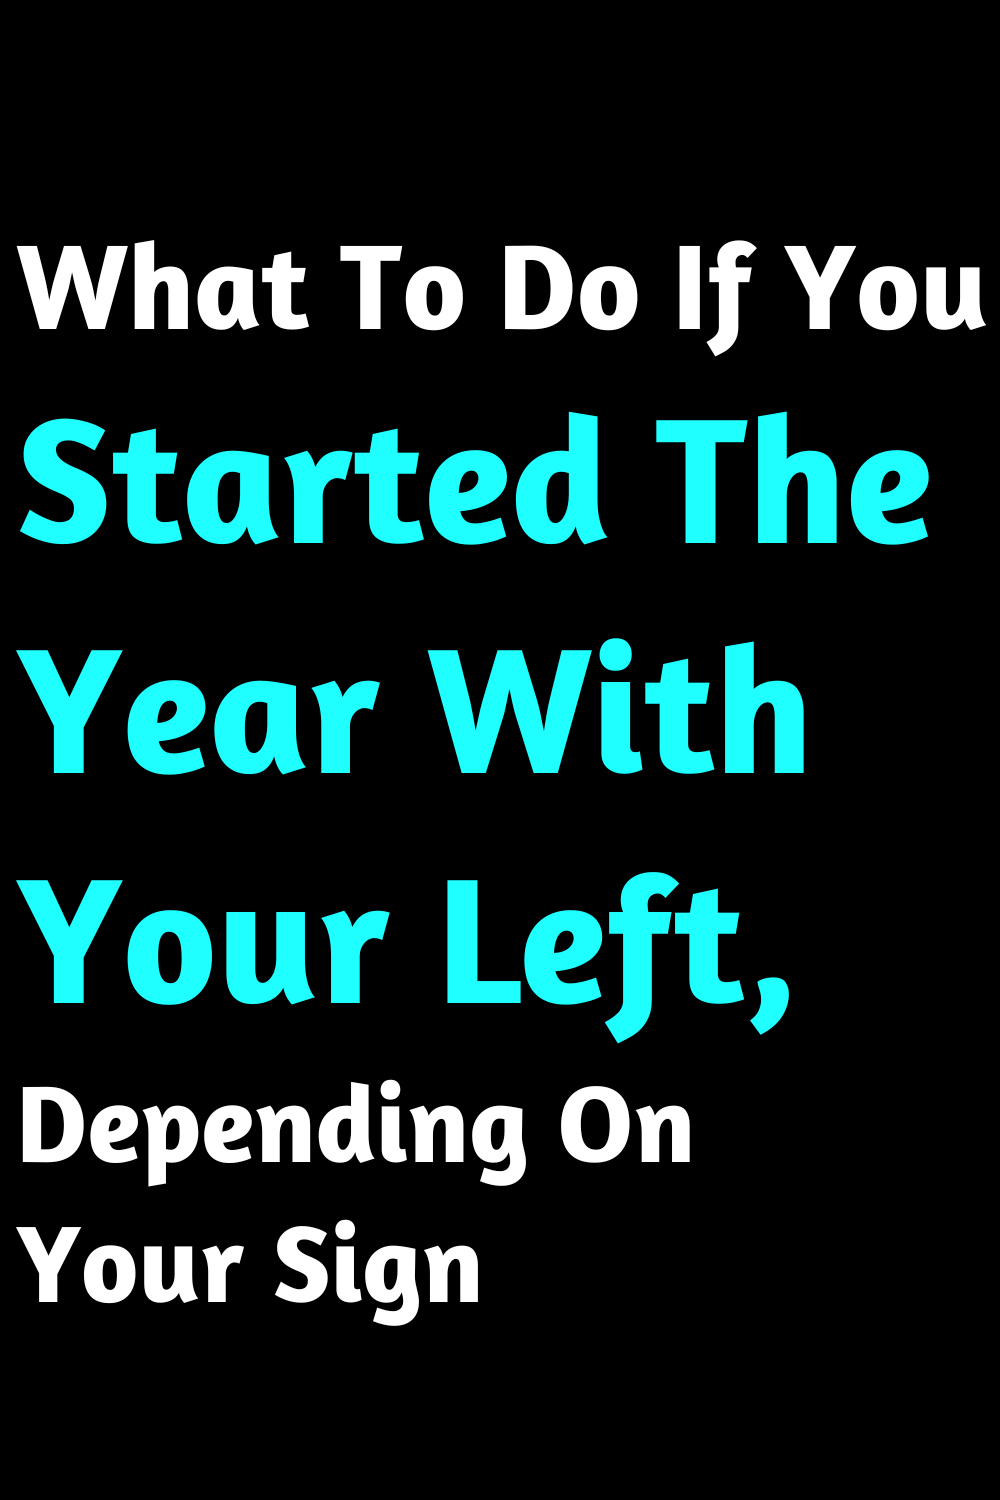 What To Do If You Started The Year With Your Left, Depending On Your Sign